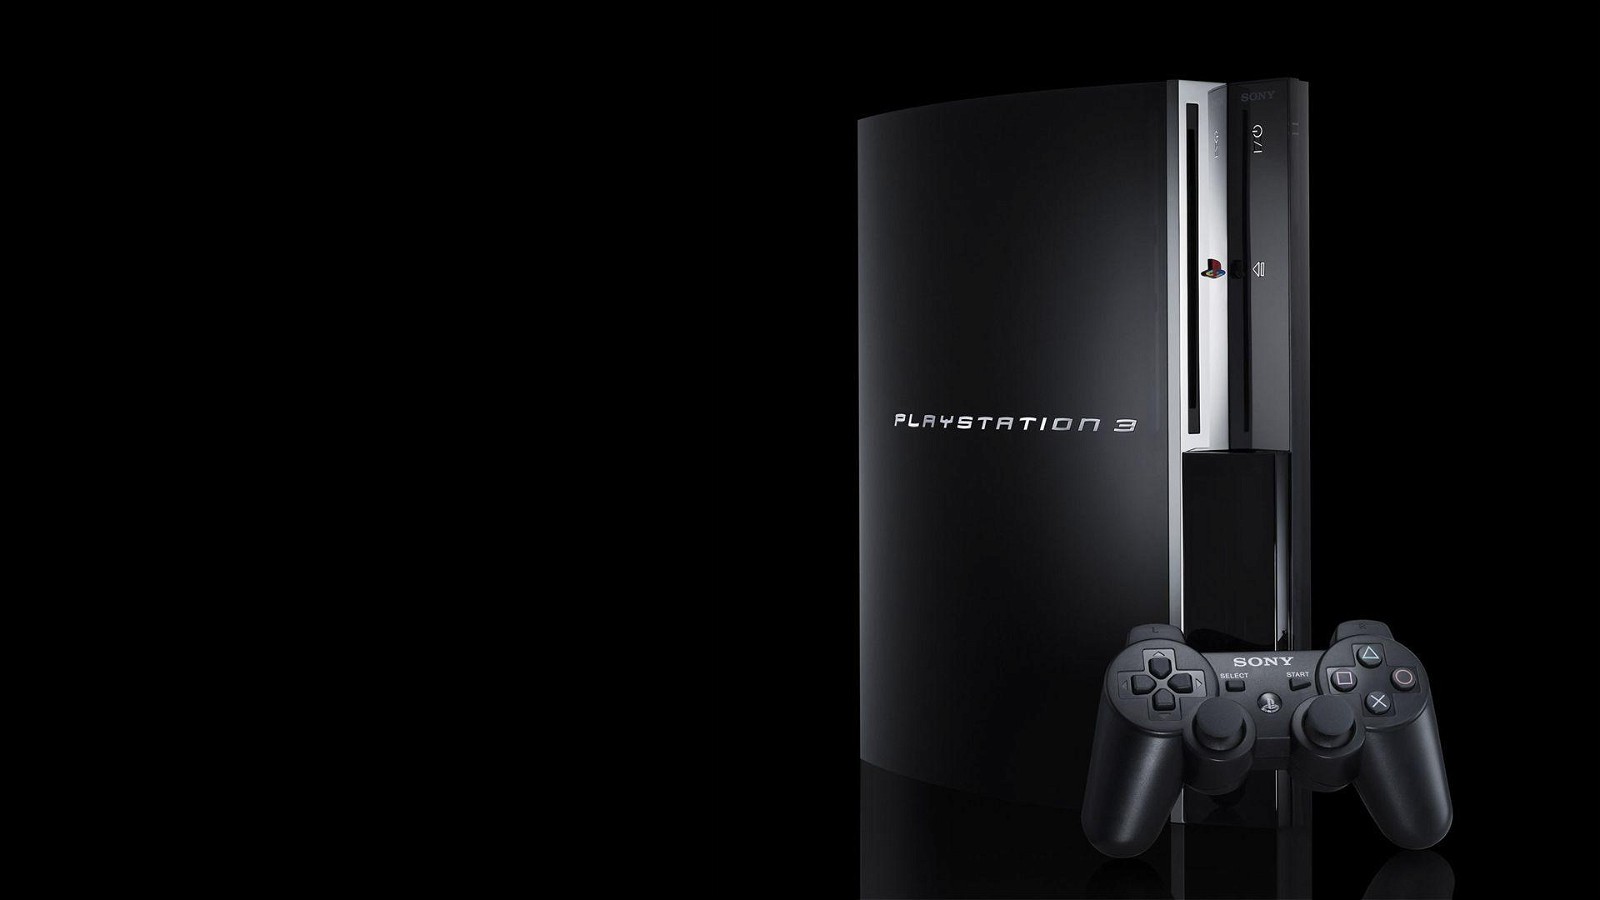 Similar to the PS5, the PlayStation 3 Was Quite Big, and It Received 2 Slim Editions